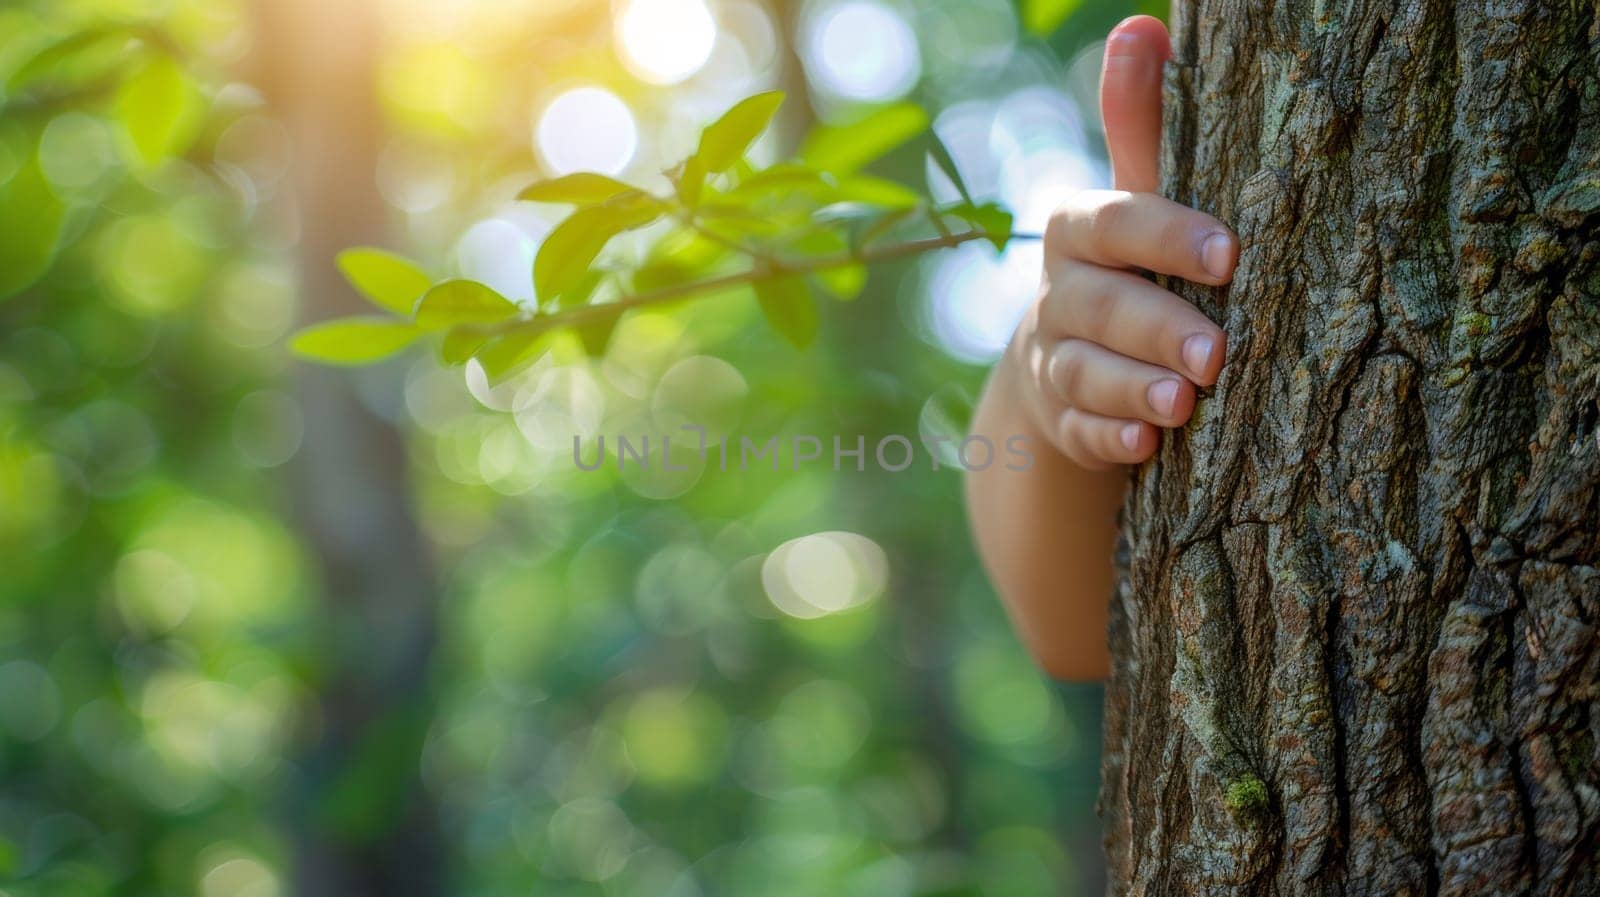 A person's hand on a tree trunk with green leaves